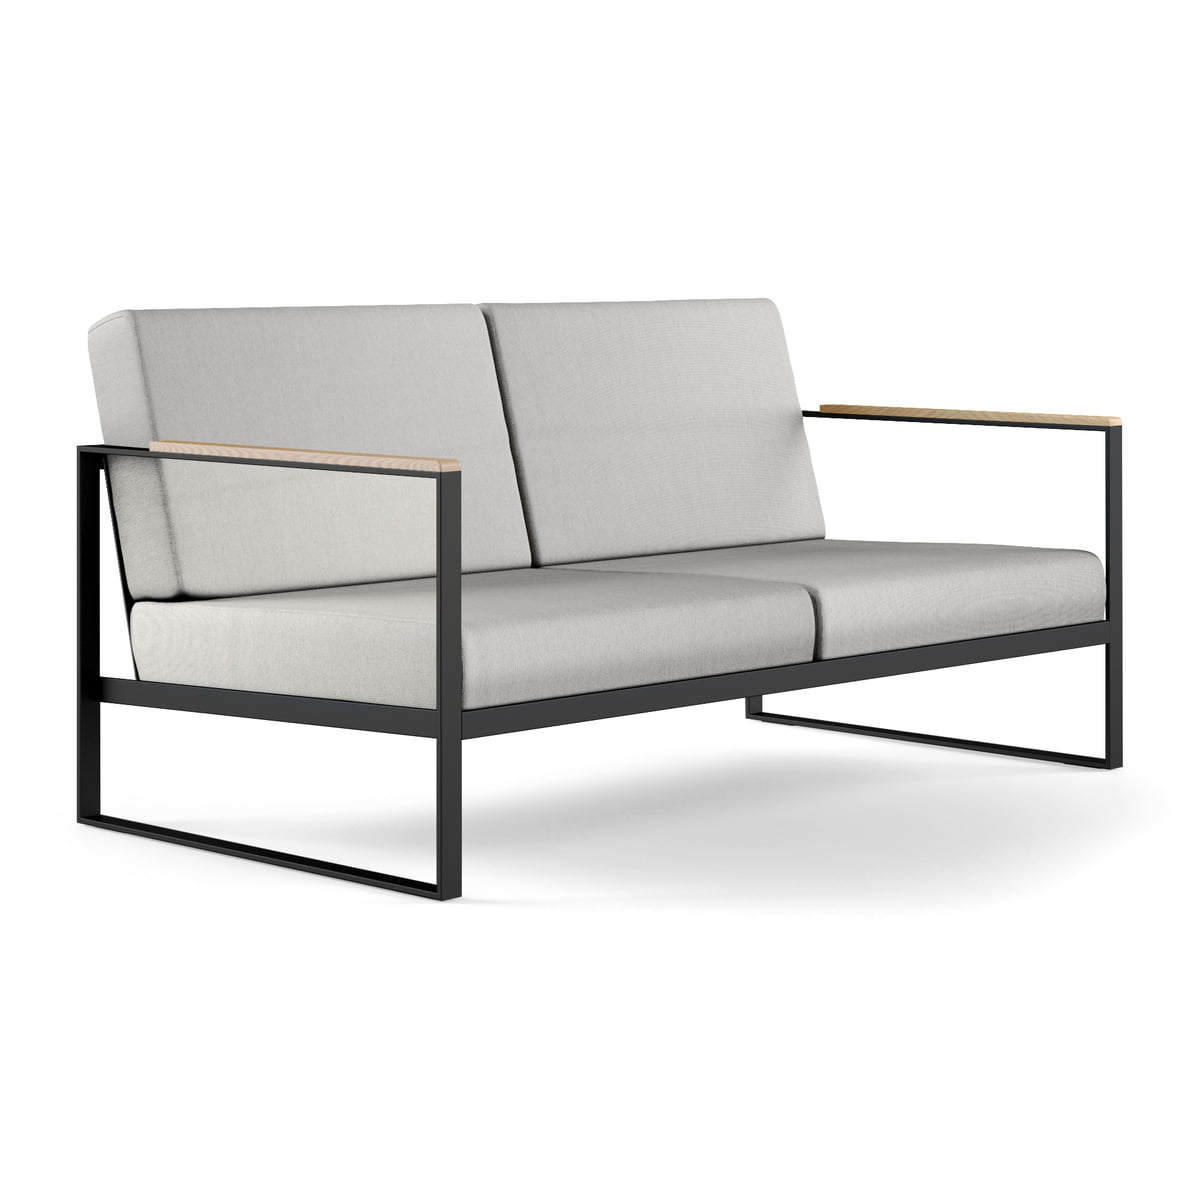 Garden Easy 2 Seater Sofa by Röshults | Connox